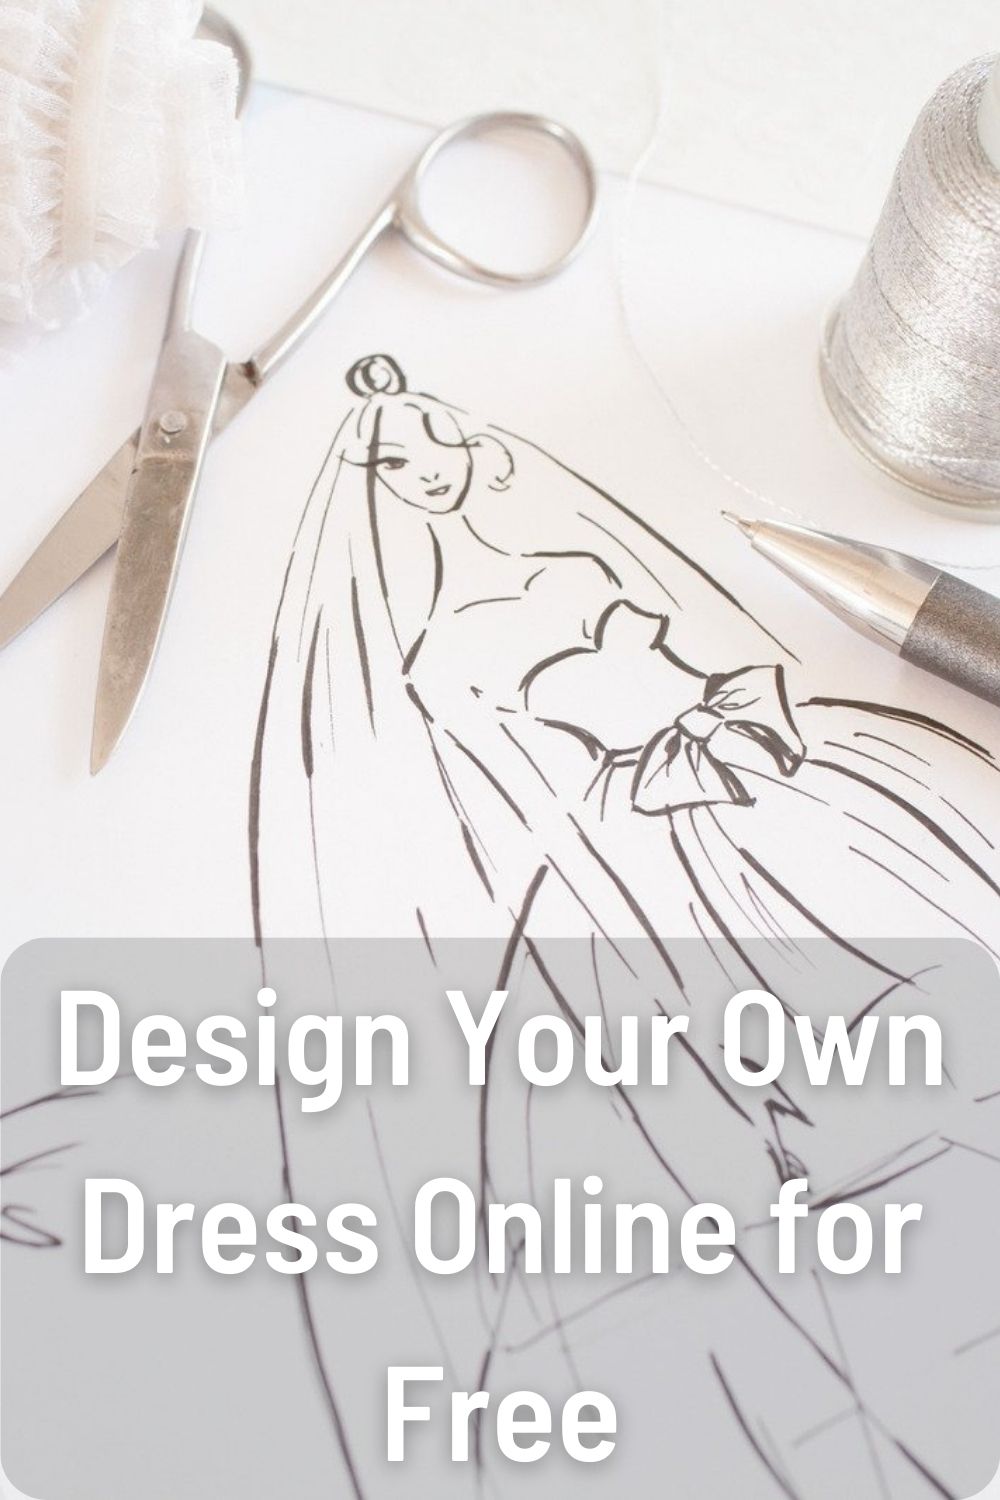 Design Your Own Dress Online for Free